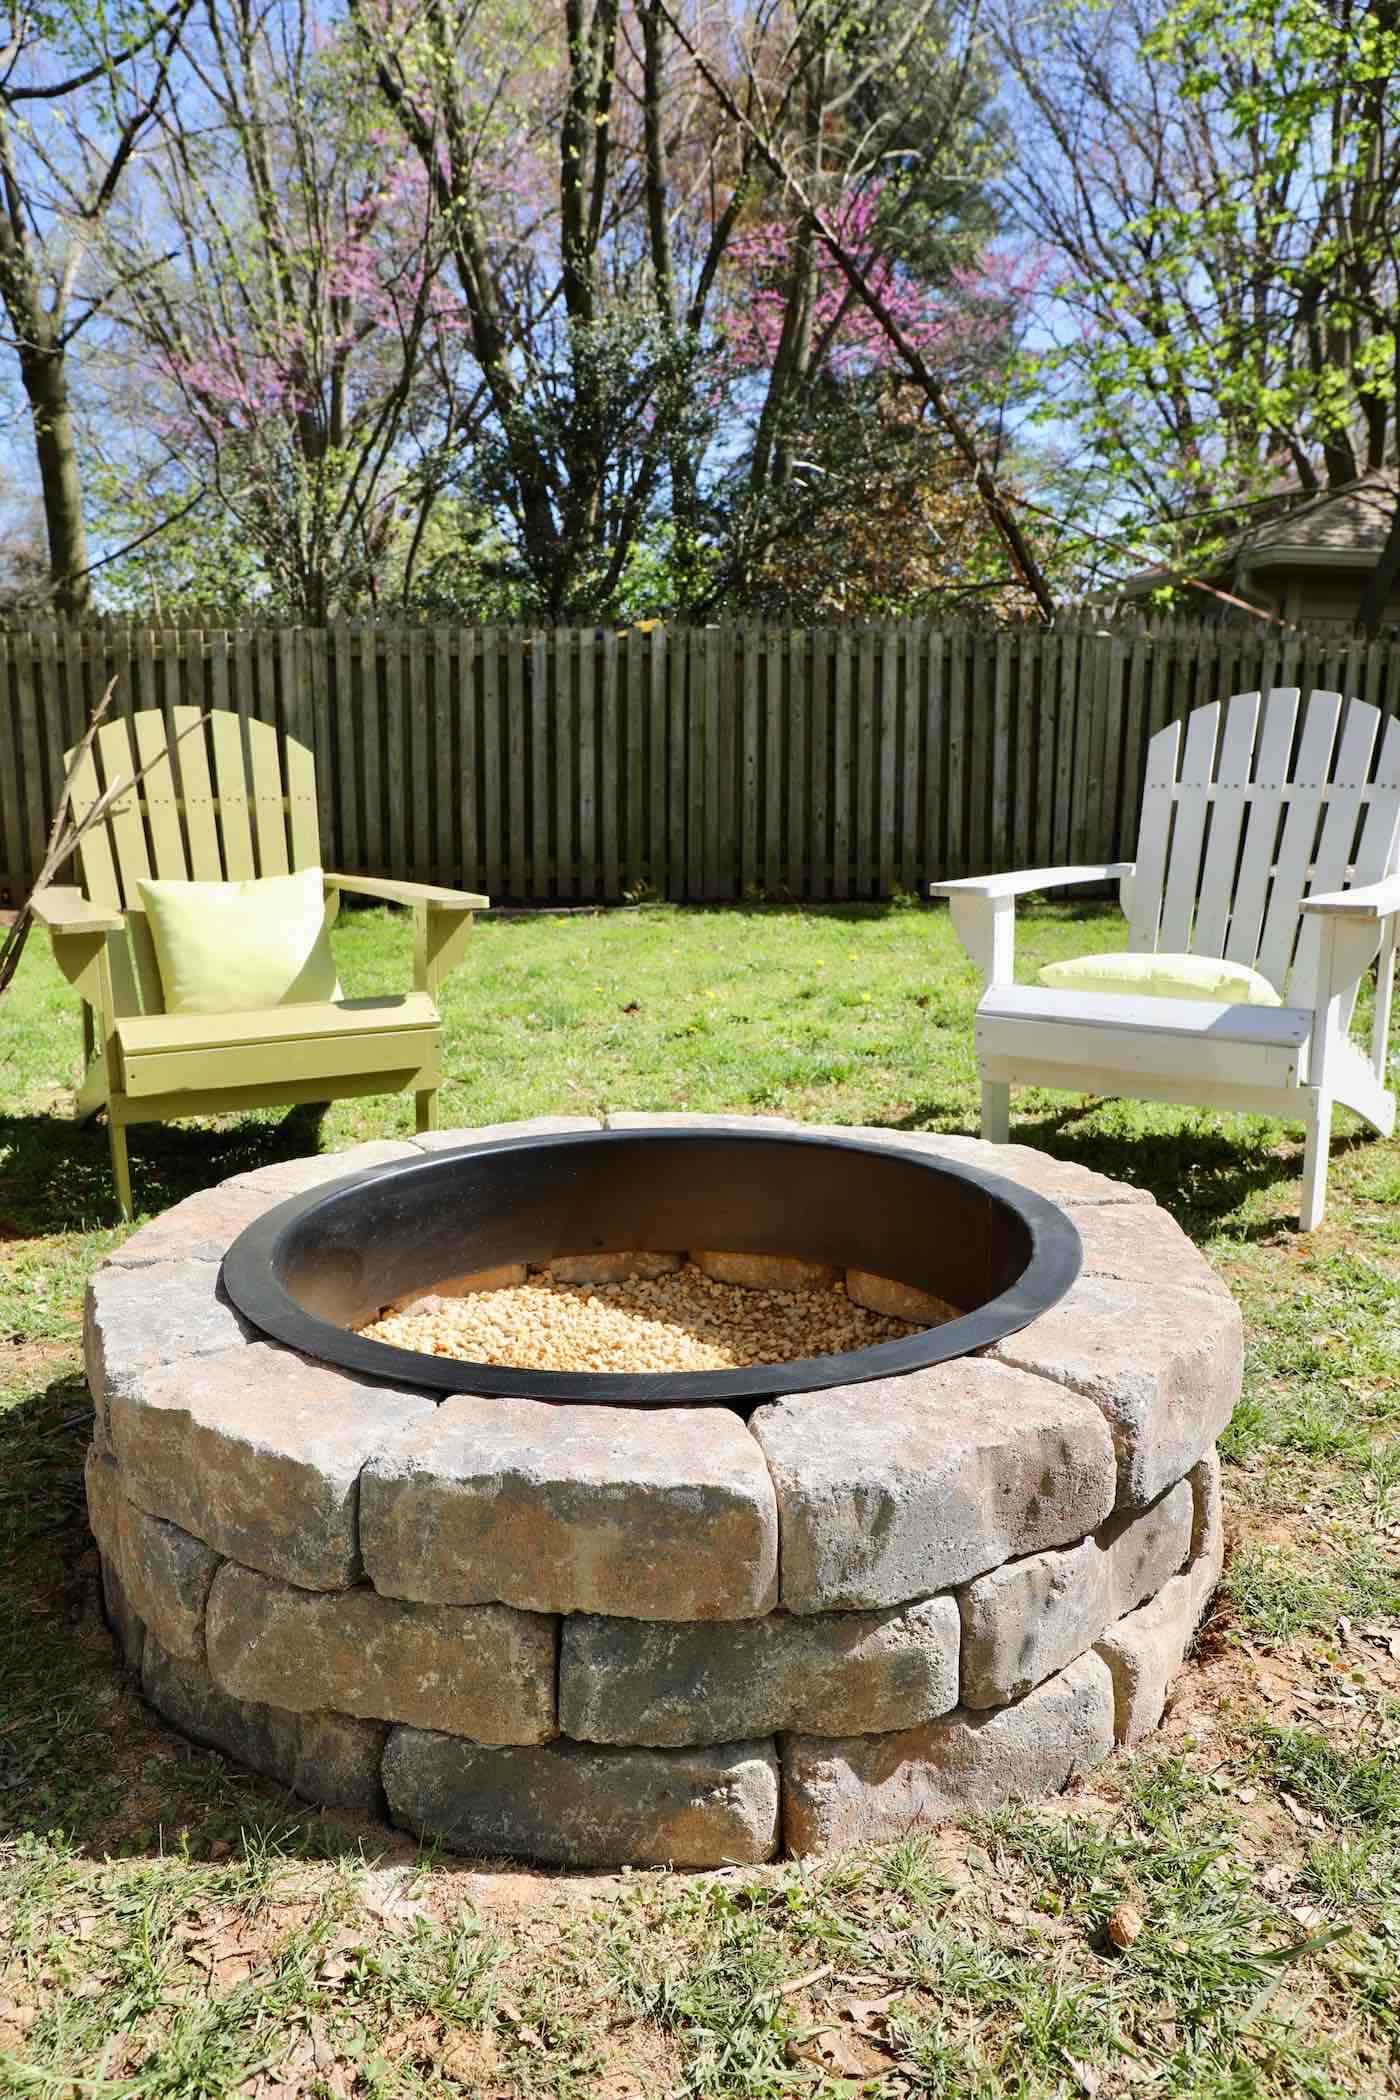 Diy Fire Pit With Gravel Stones, Best Crushed Rock For Fire Pit Area